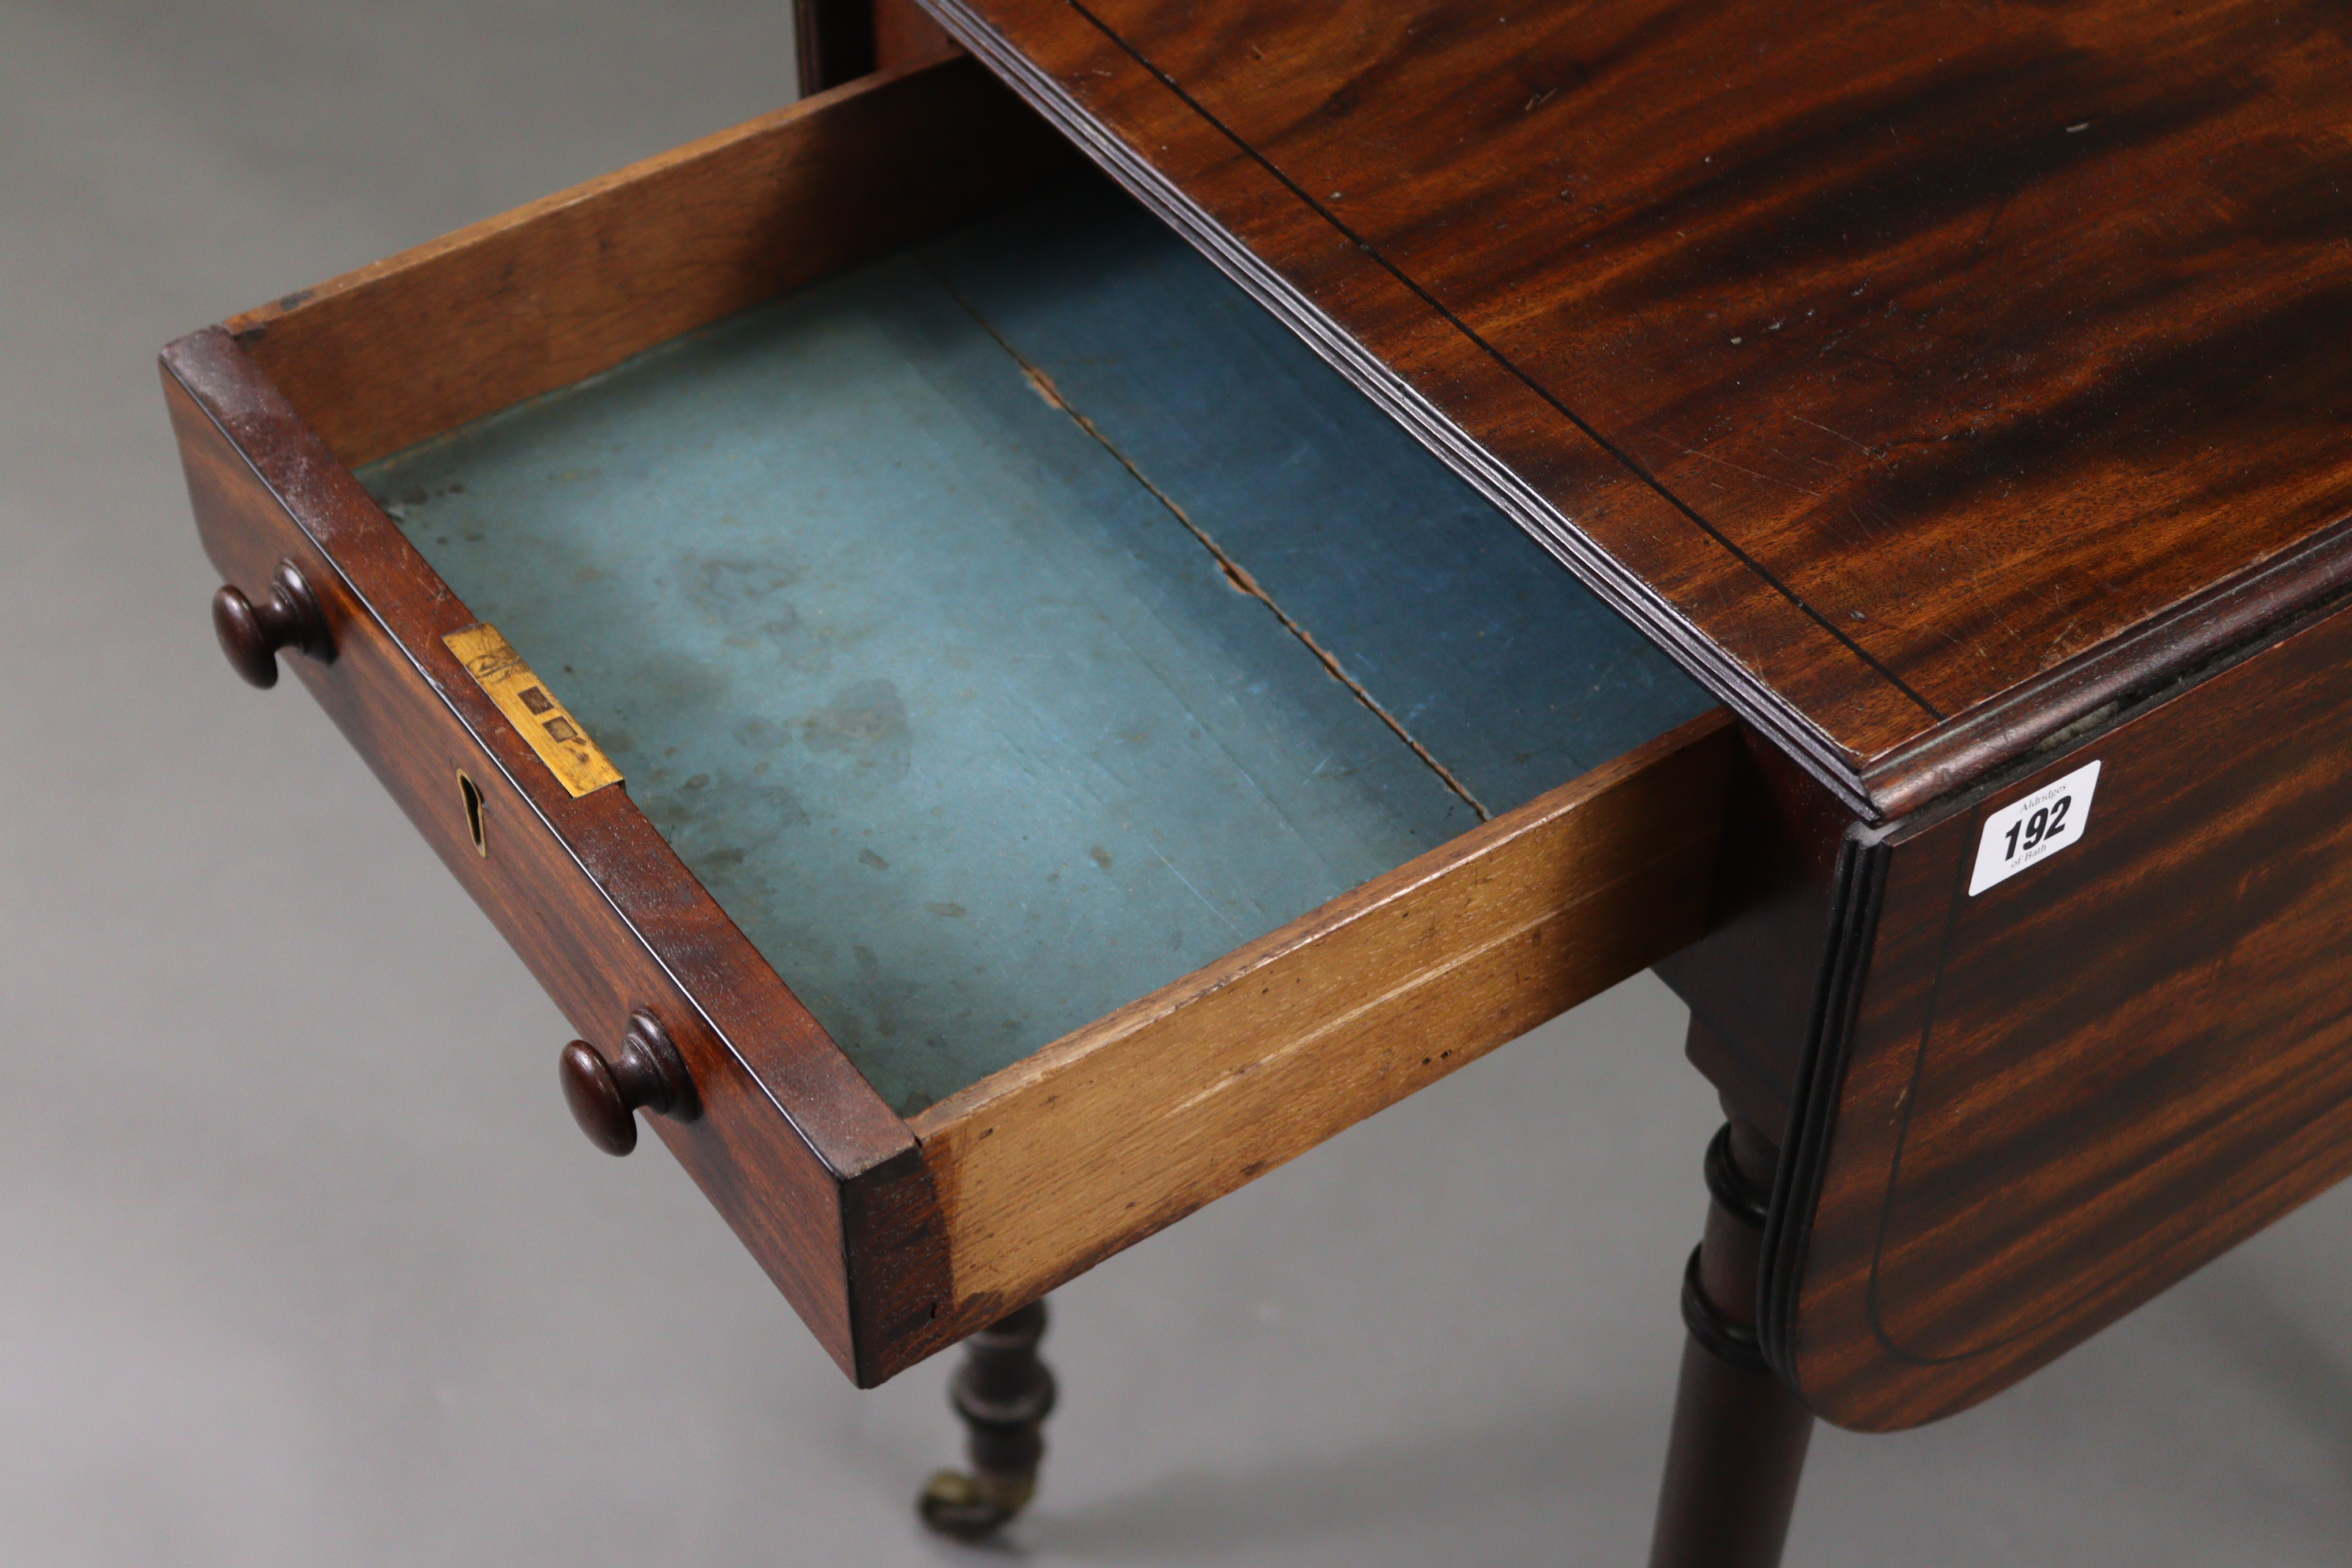 A 19th century inlaid-mahogany rectangular drop-leaf work table, on ring-turned legs with brass - Image 6 of 8